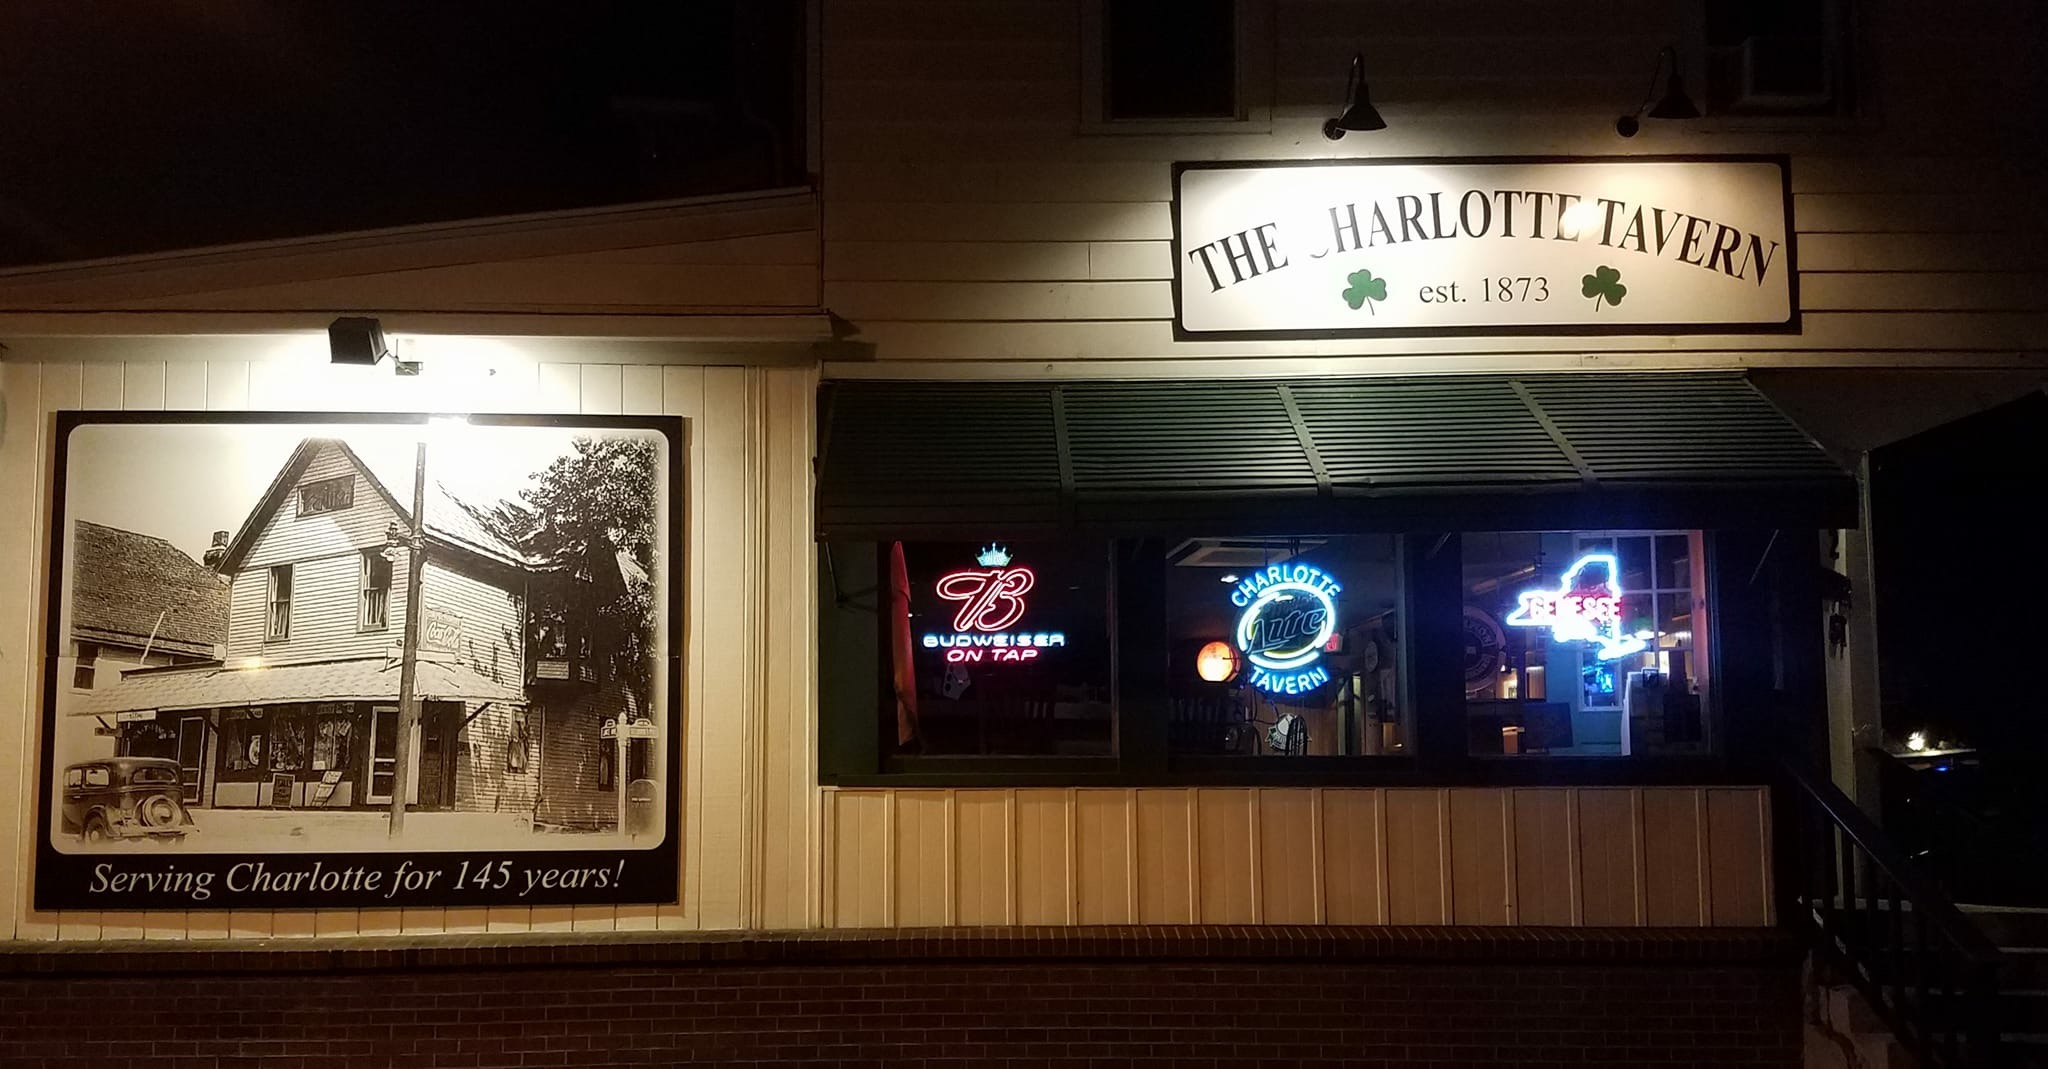 The Charlotte Tavern outdoor signs on building